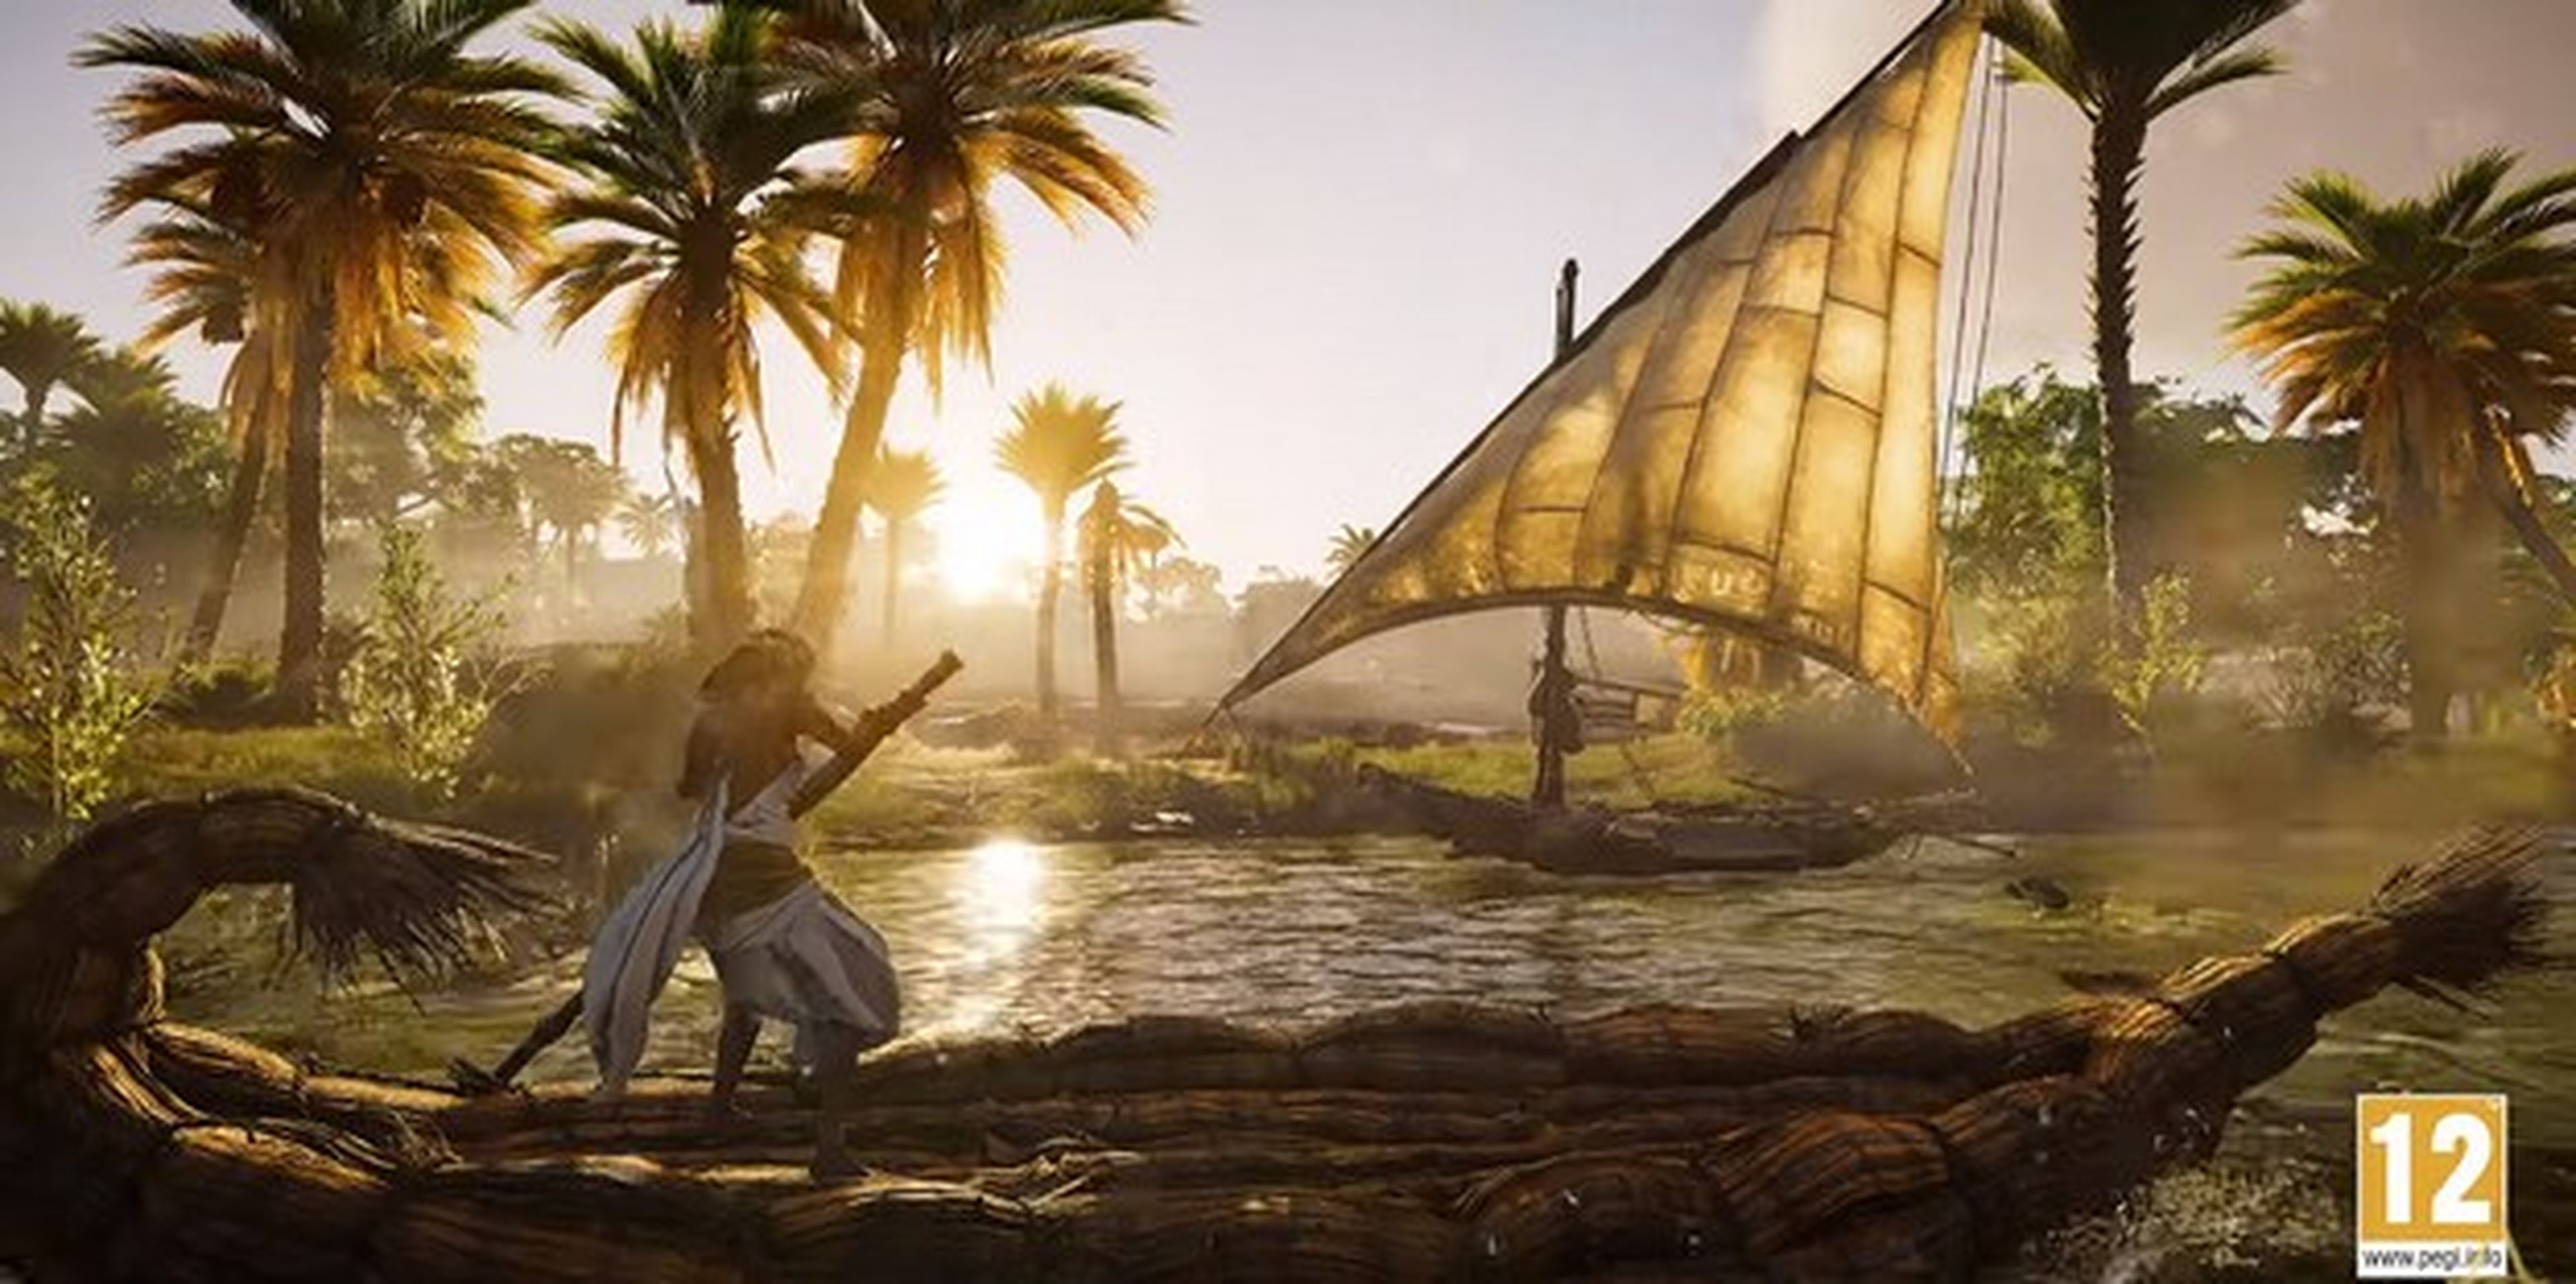 The Diiscovery Tour Assassin's Creed Origins